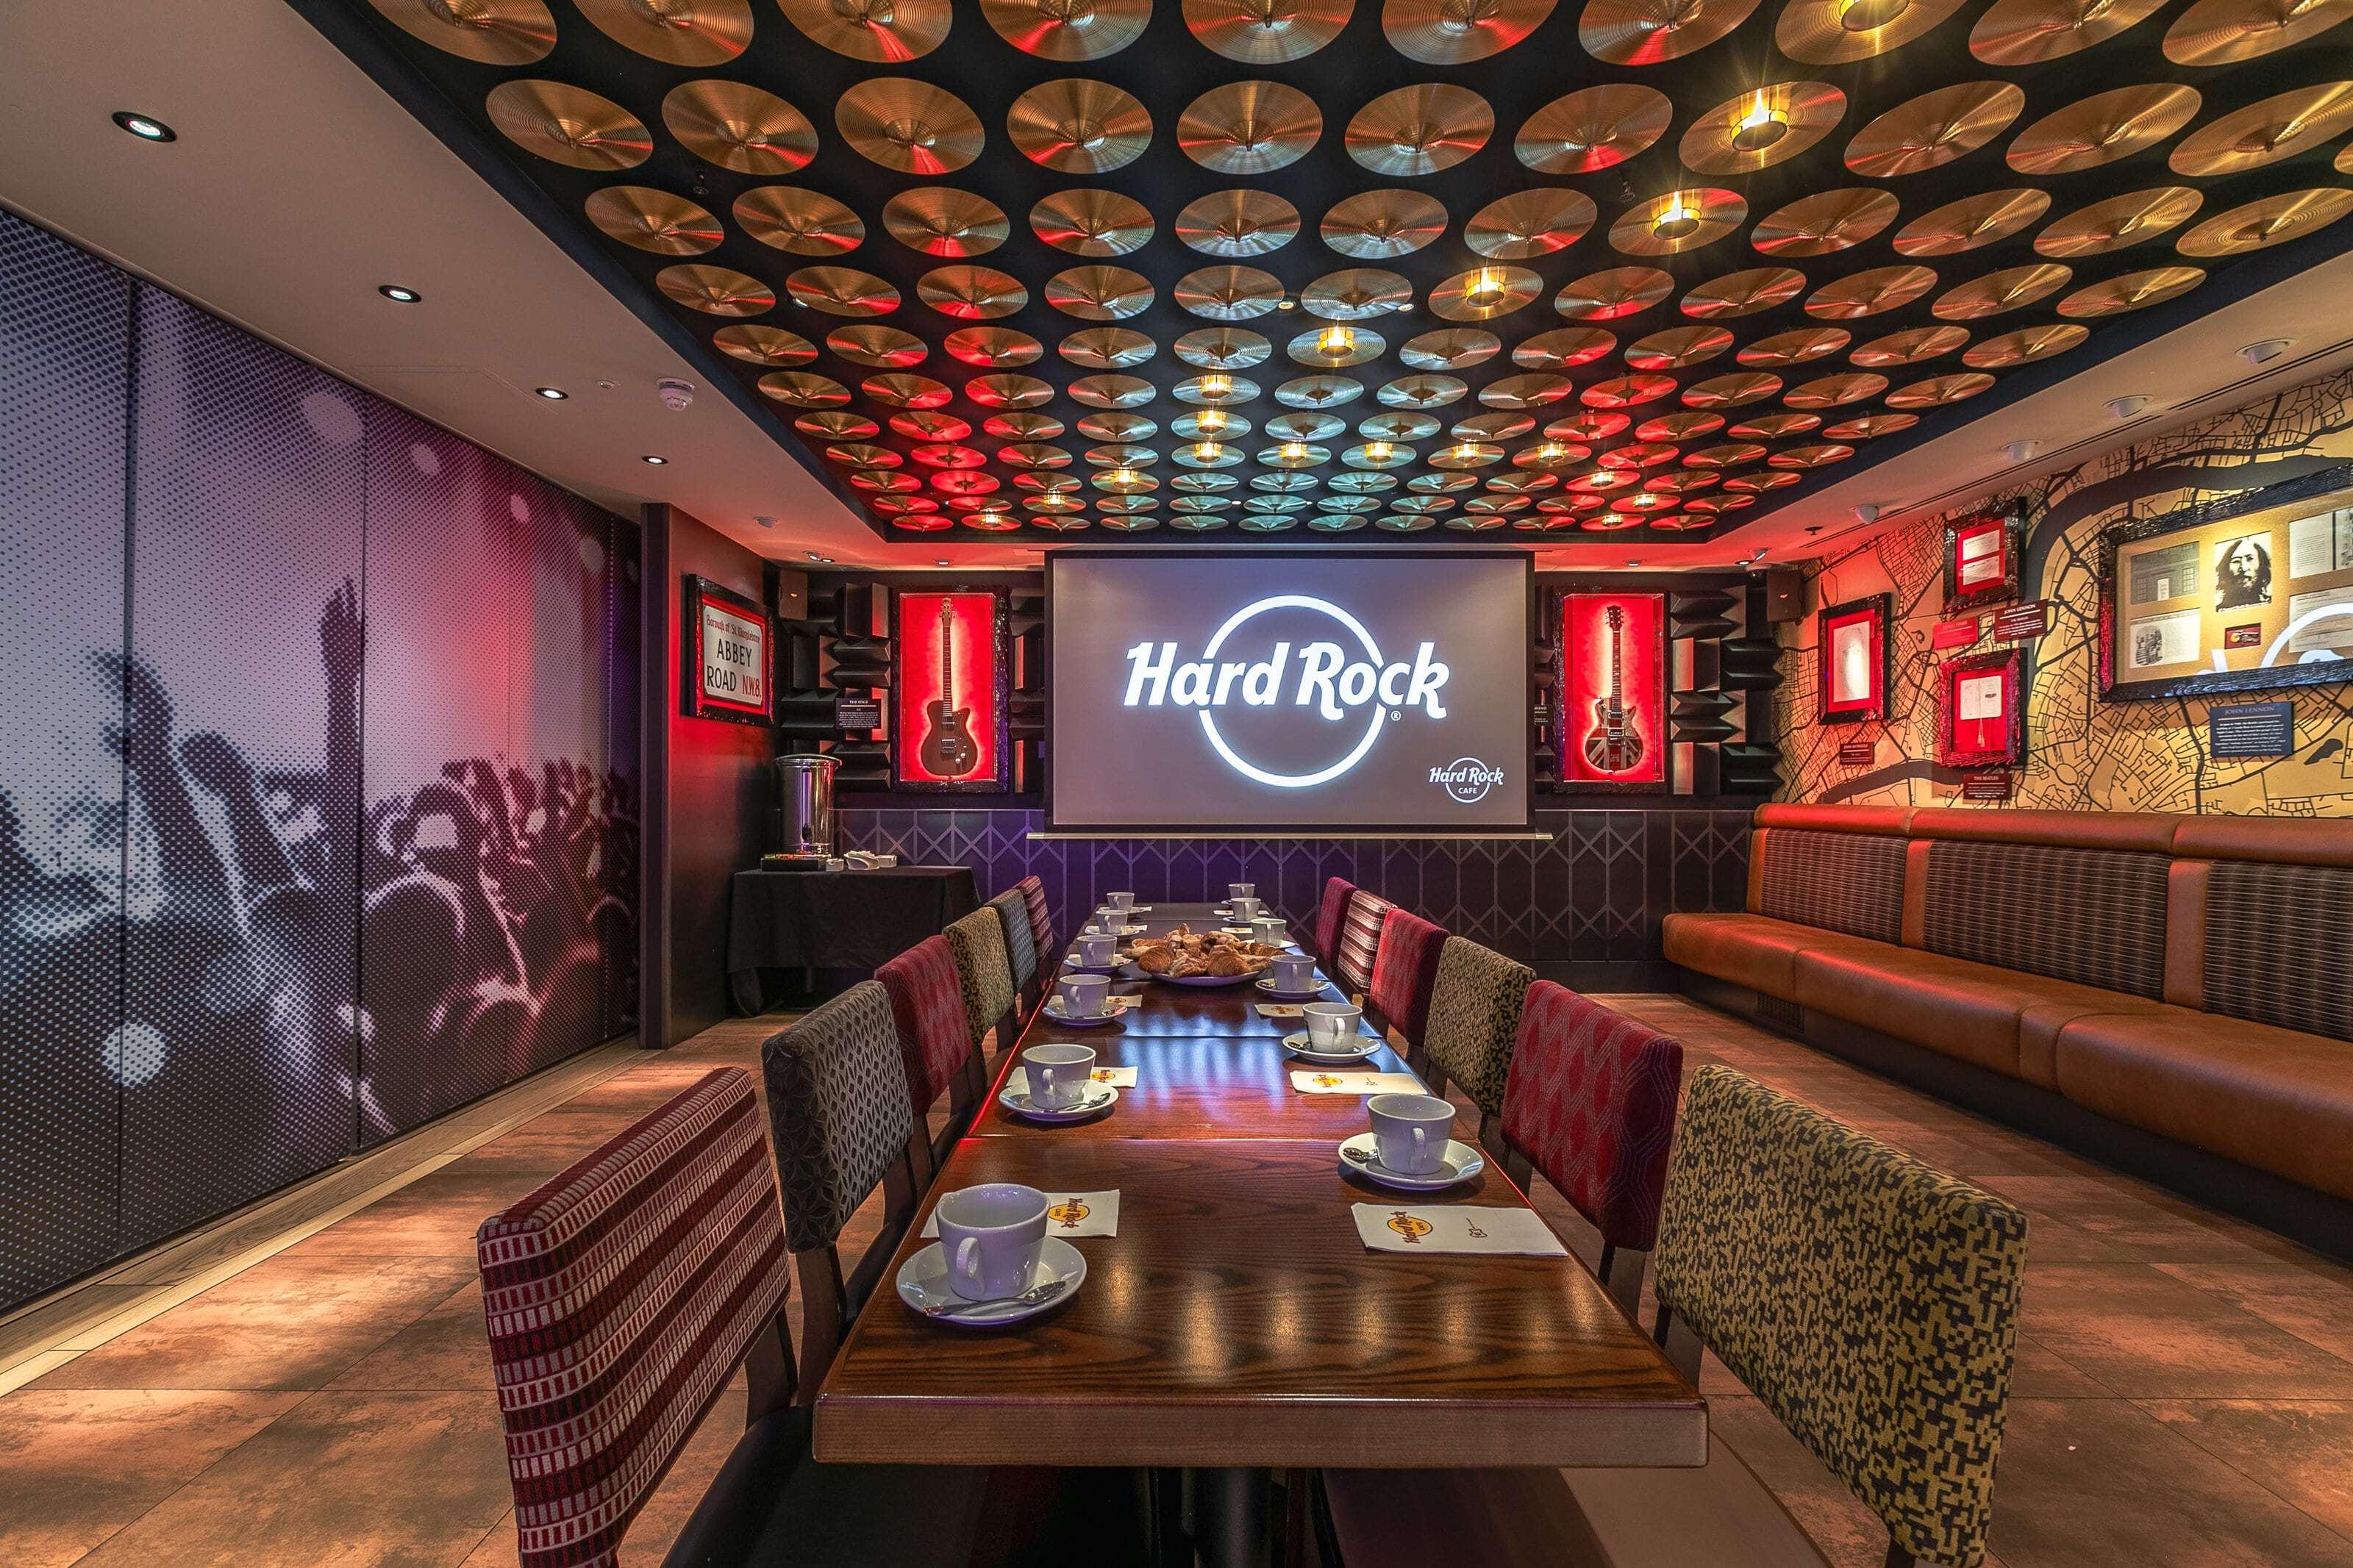 Hard Rock Cafe Piccadilly Circus, Legends Room - Meeting Space photo #1